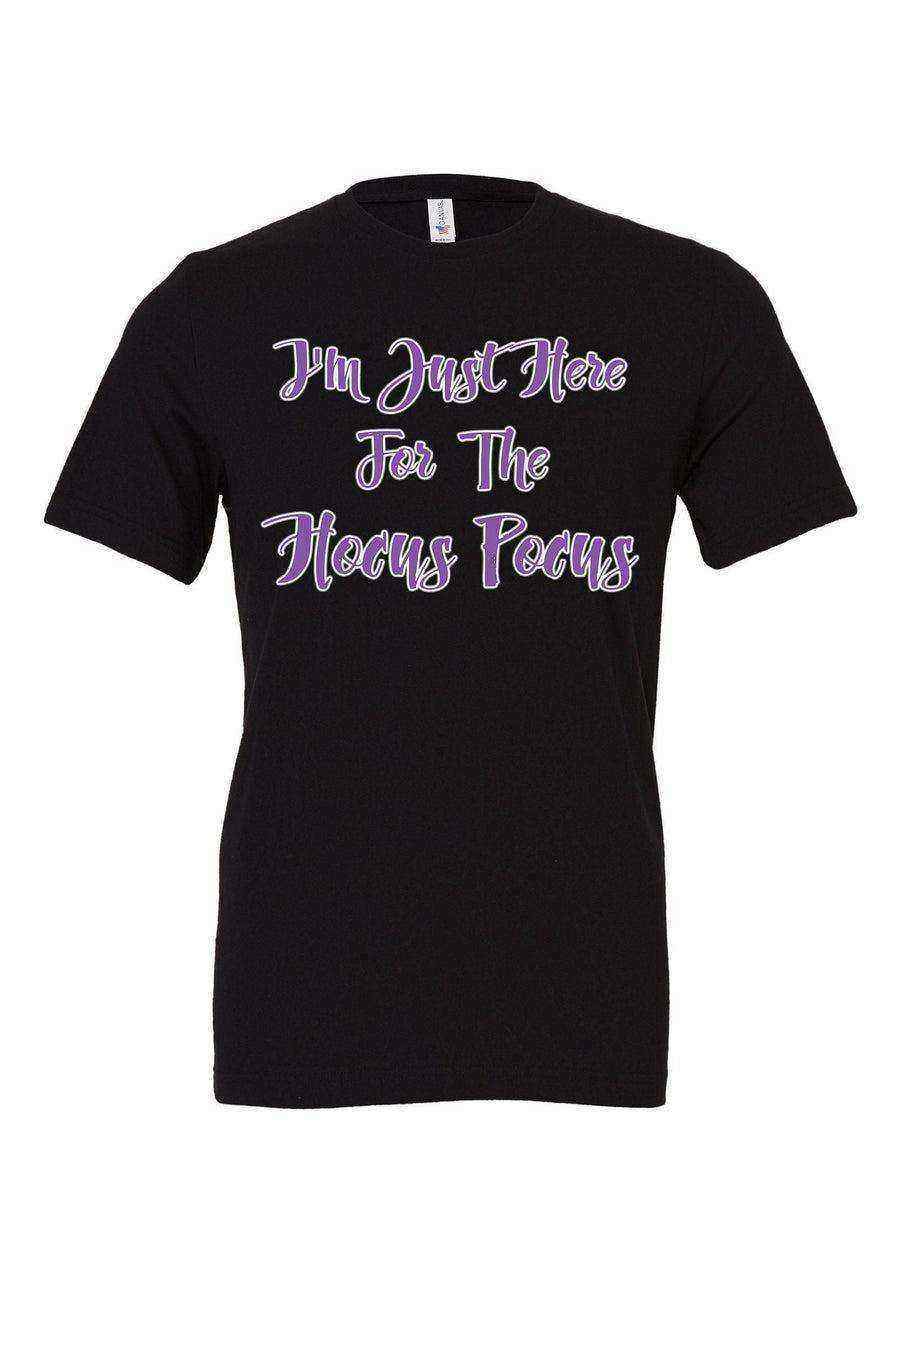 Im Just Here for the Hocus Pocus Shirt - Dylan's Tees